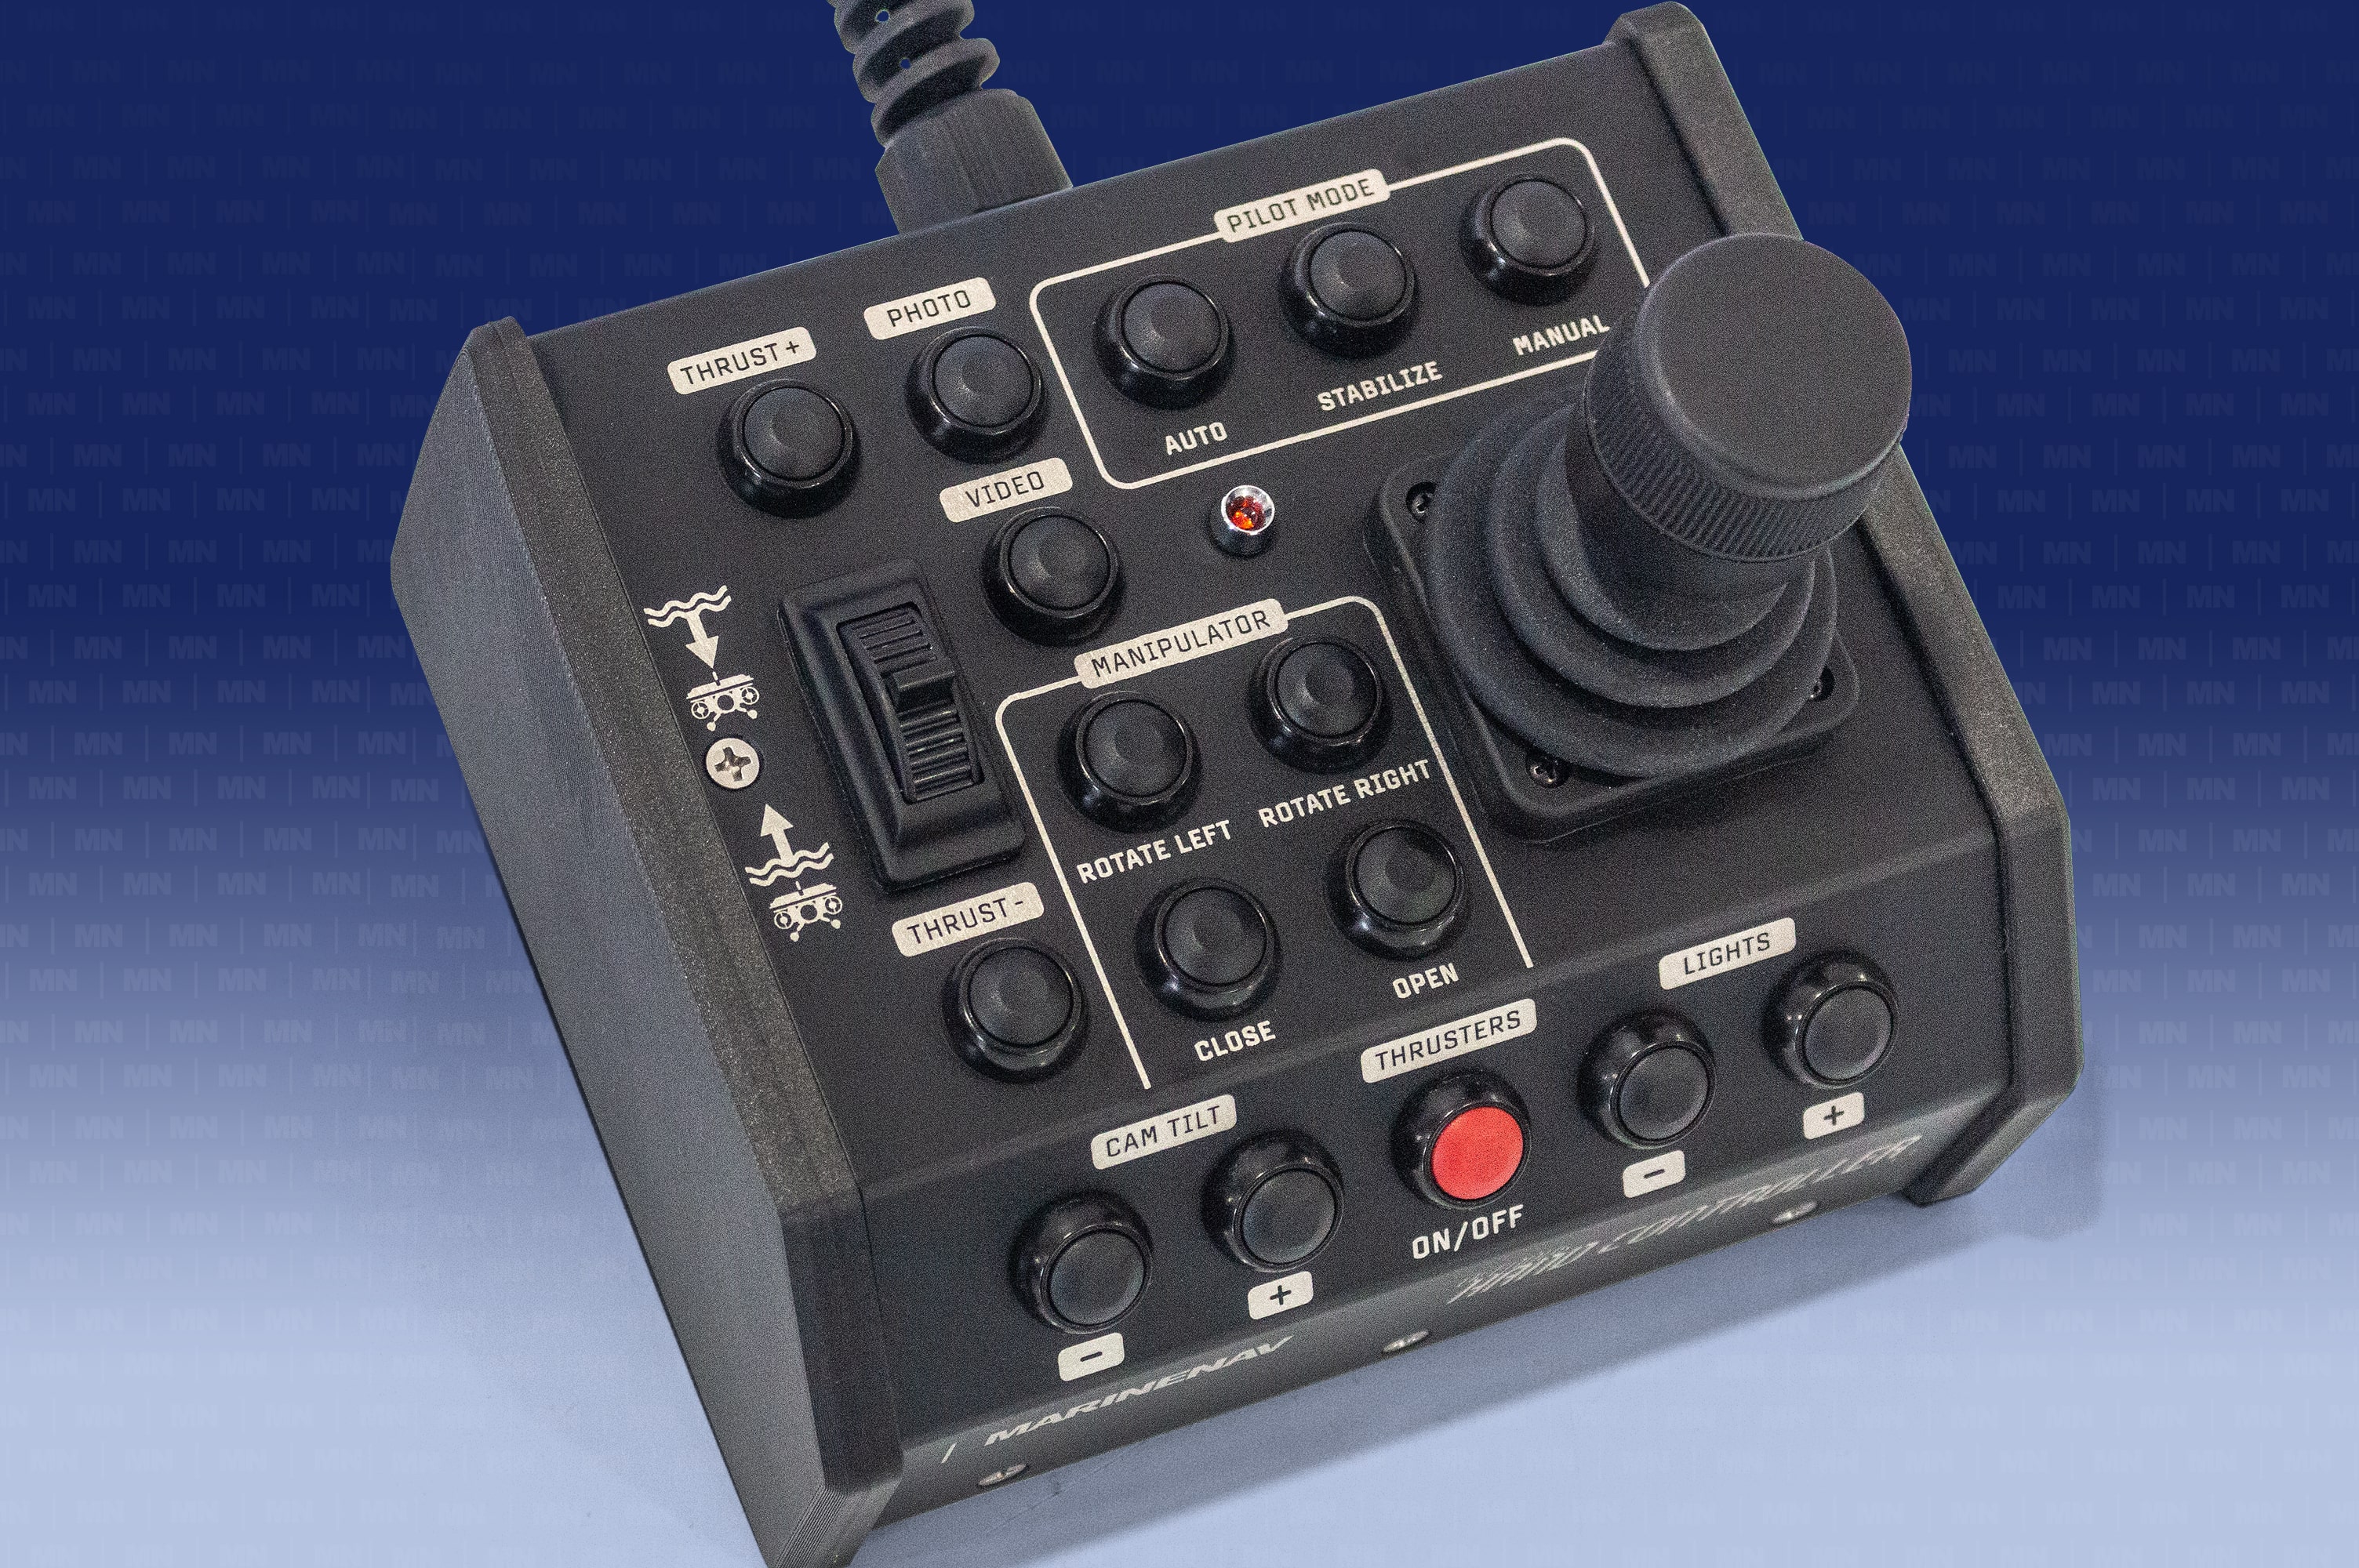 The Oceanus Hand Controller (v3.0) is an optional upgrade for use with MarineNav's Oceanus Mini and Pro ROV systems